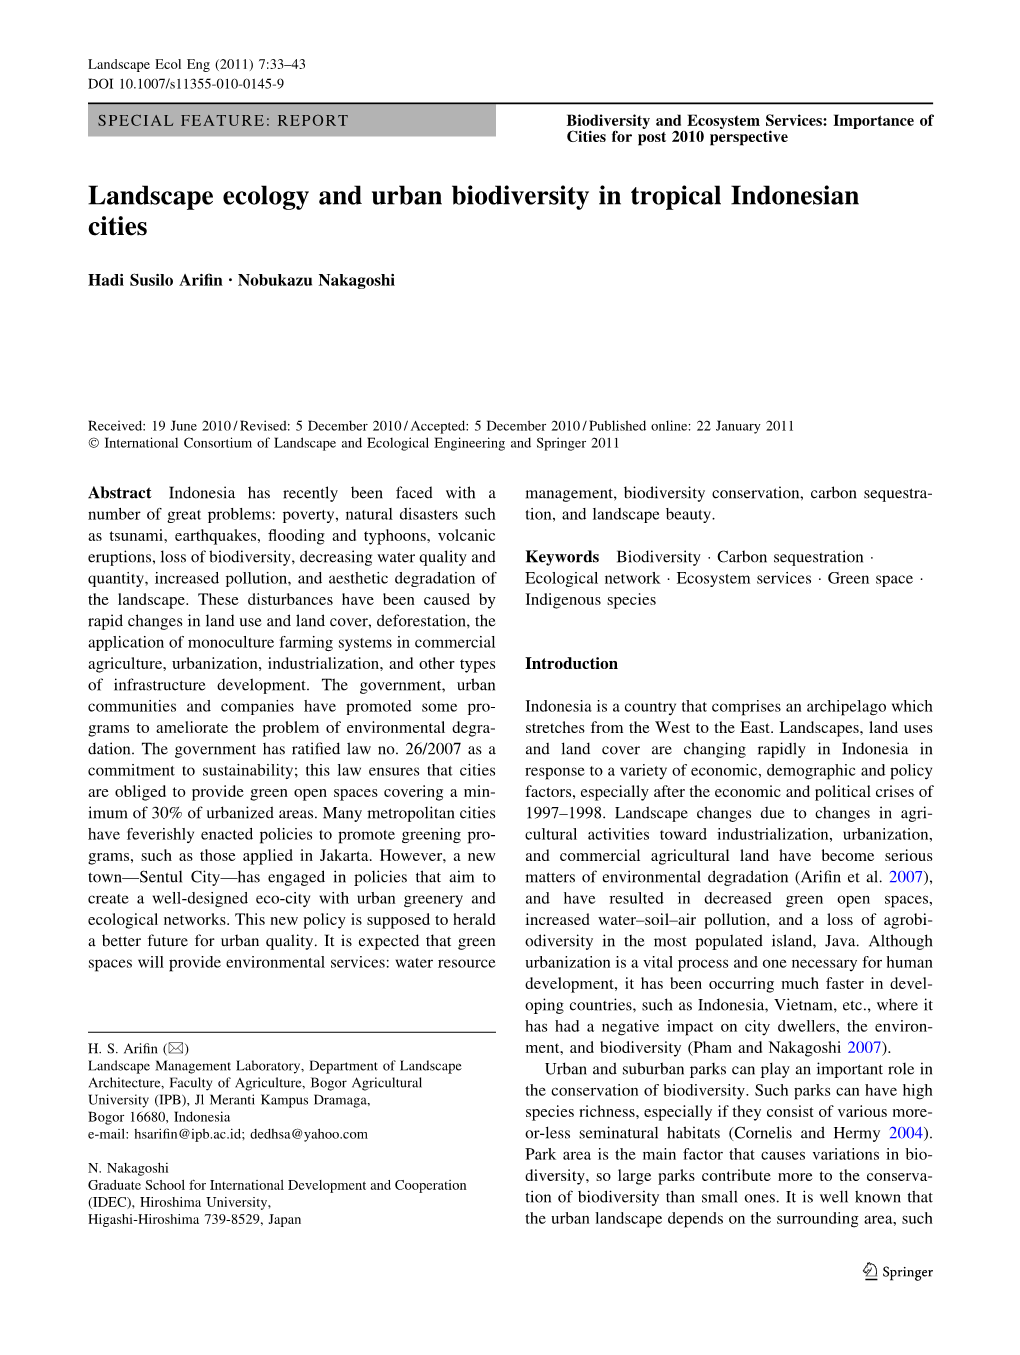 Landscape Ecology and Urban Biodiversity in Tropical Indonesian Cities